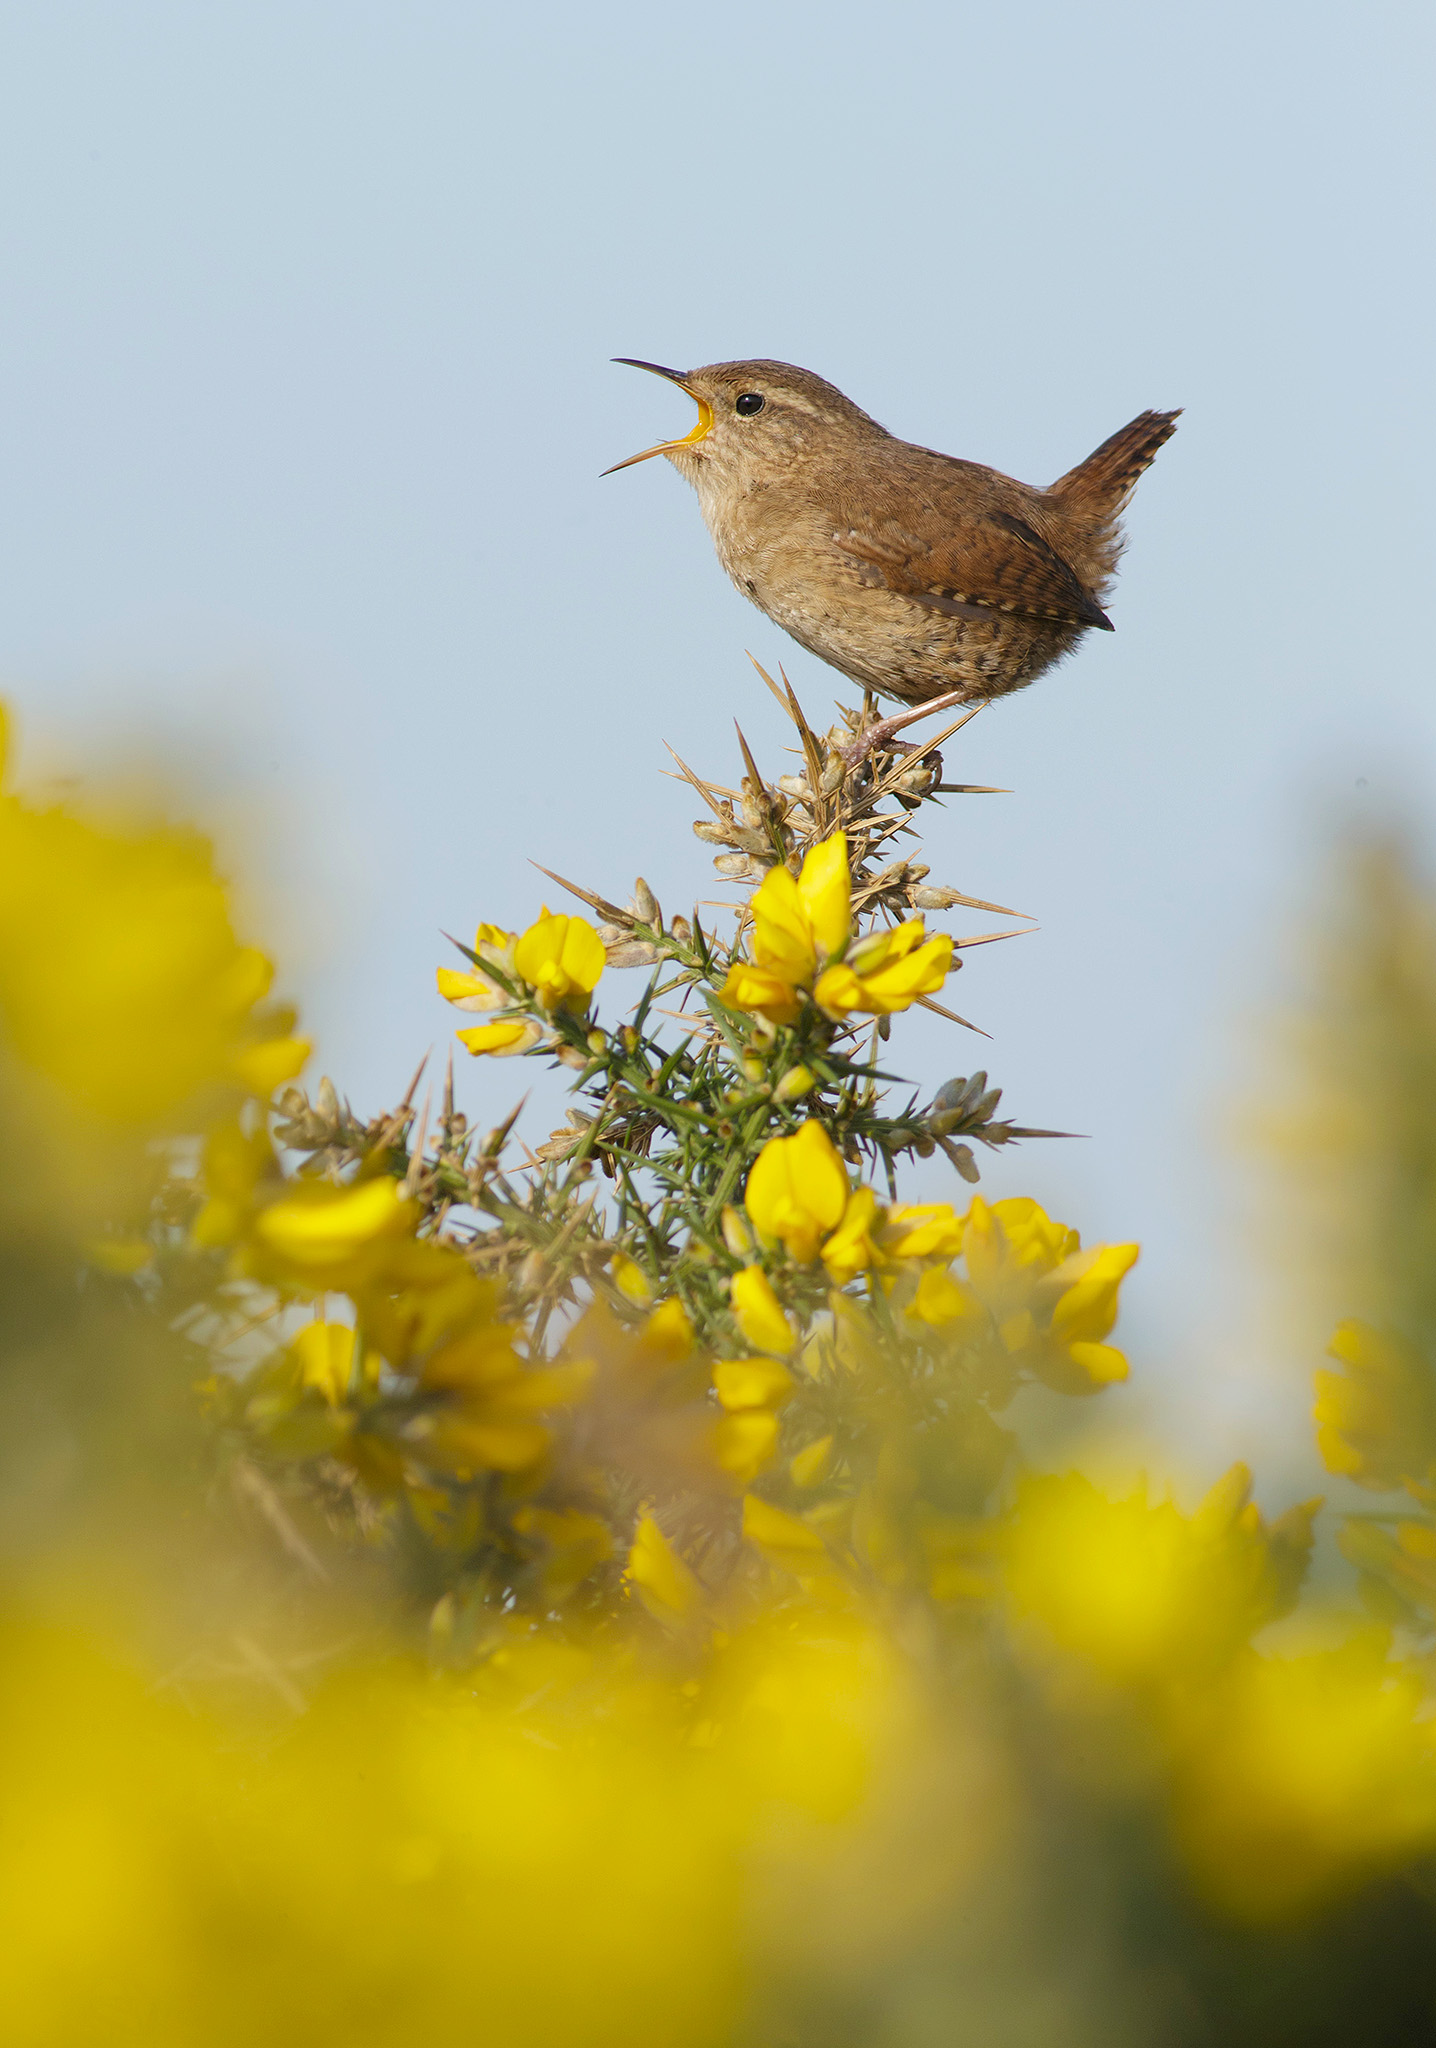 photographing wrens